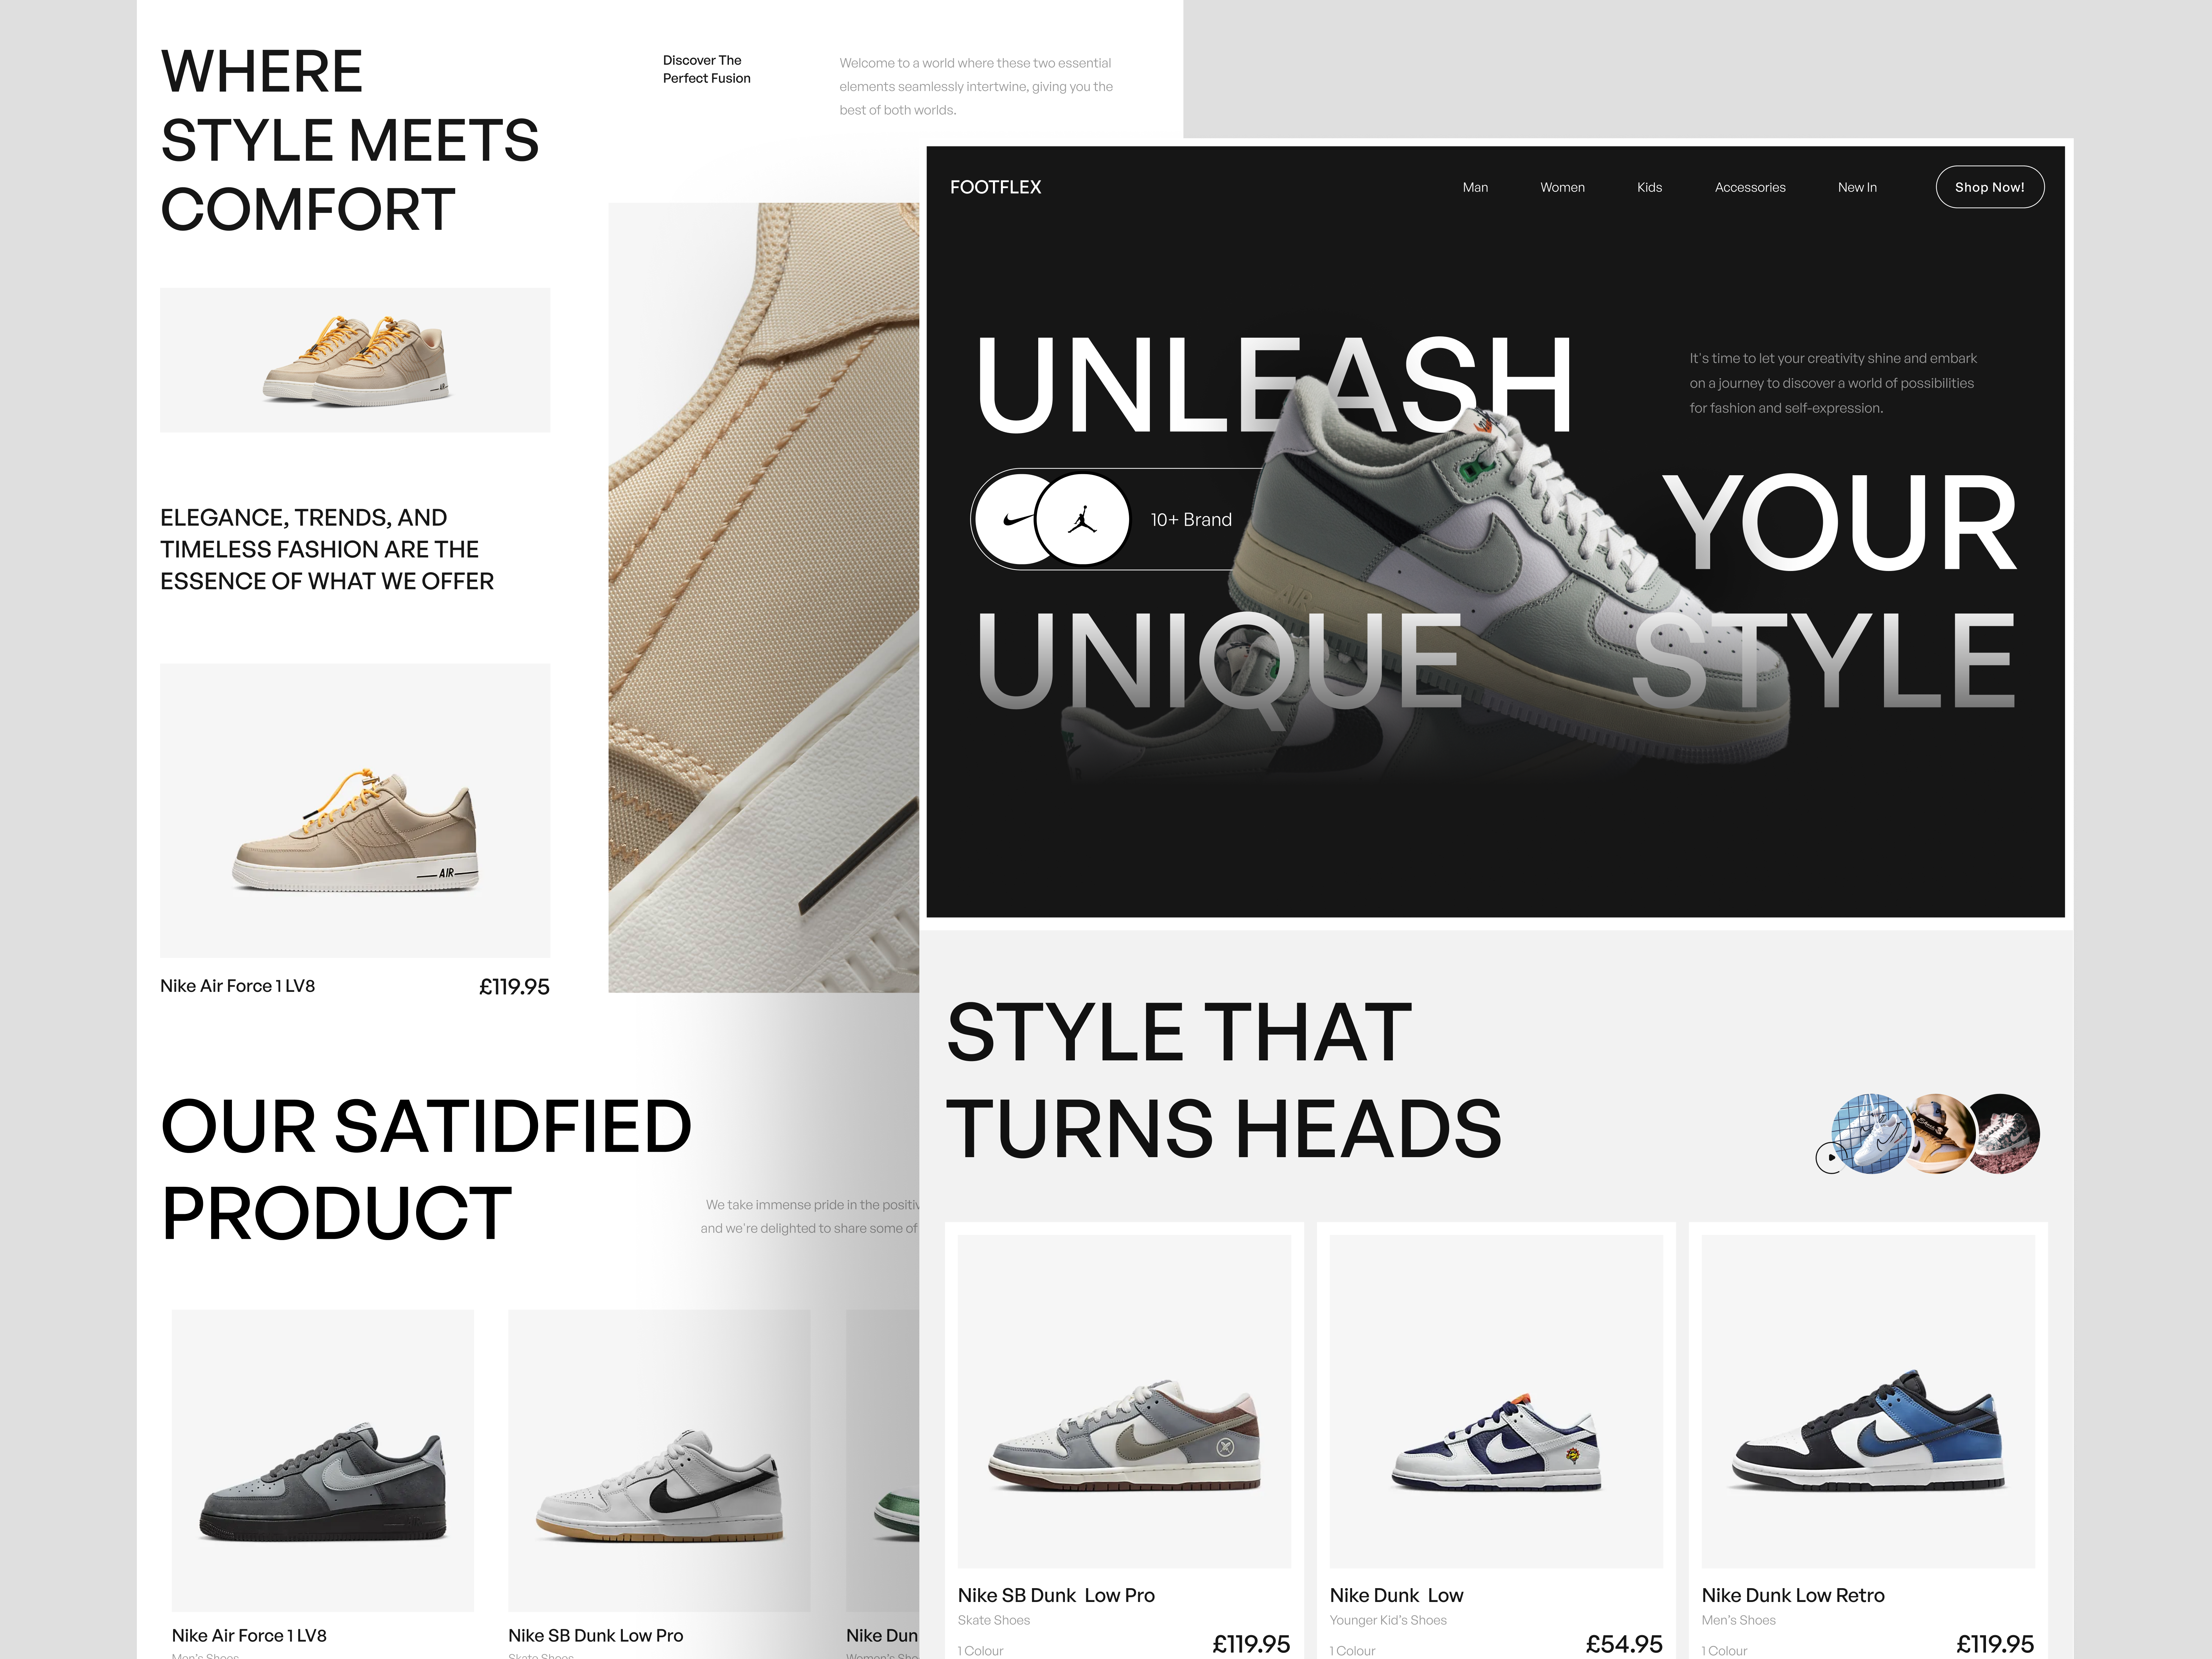 The Best Shoe eCommerce Website Designs and Marketing Tips